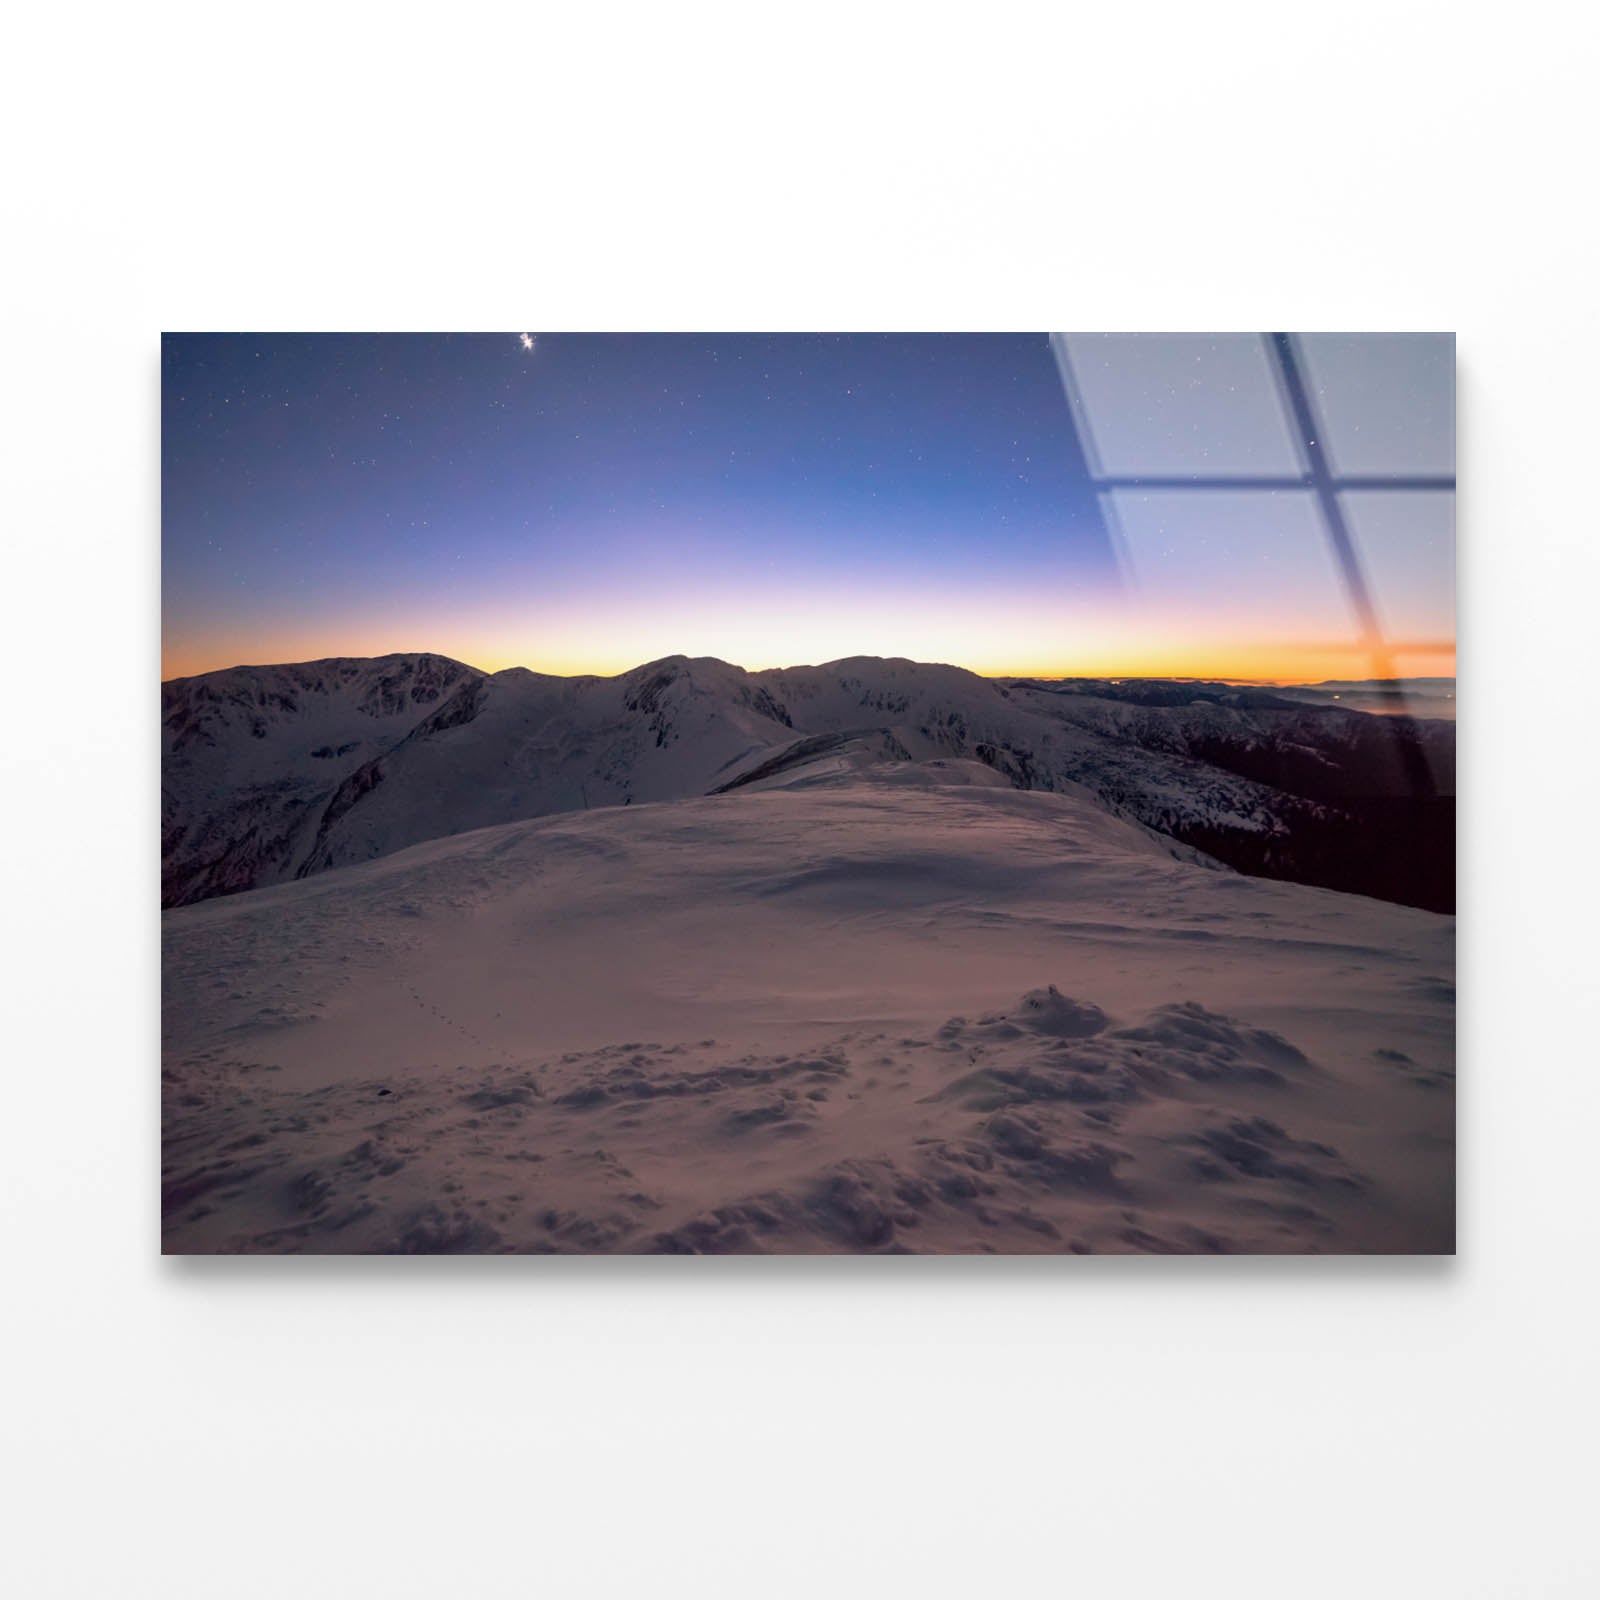 The Snowy Mountain Acrylic Glass Print Tempered Glass Wall Art 100% Made in Australia Ready to Hang